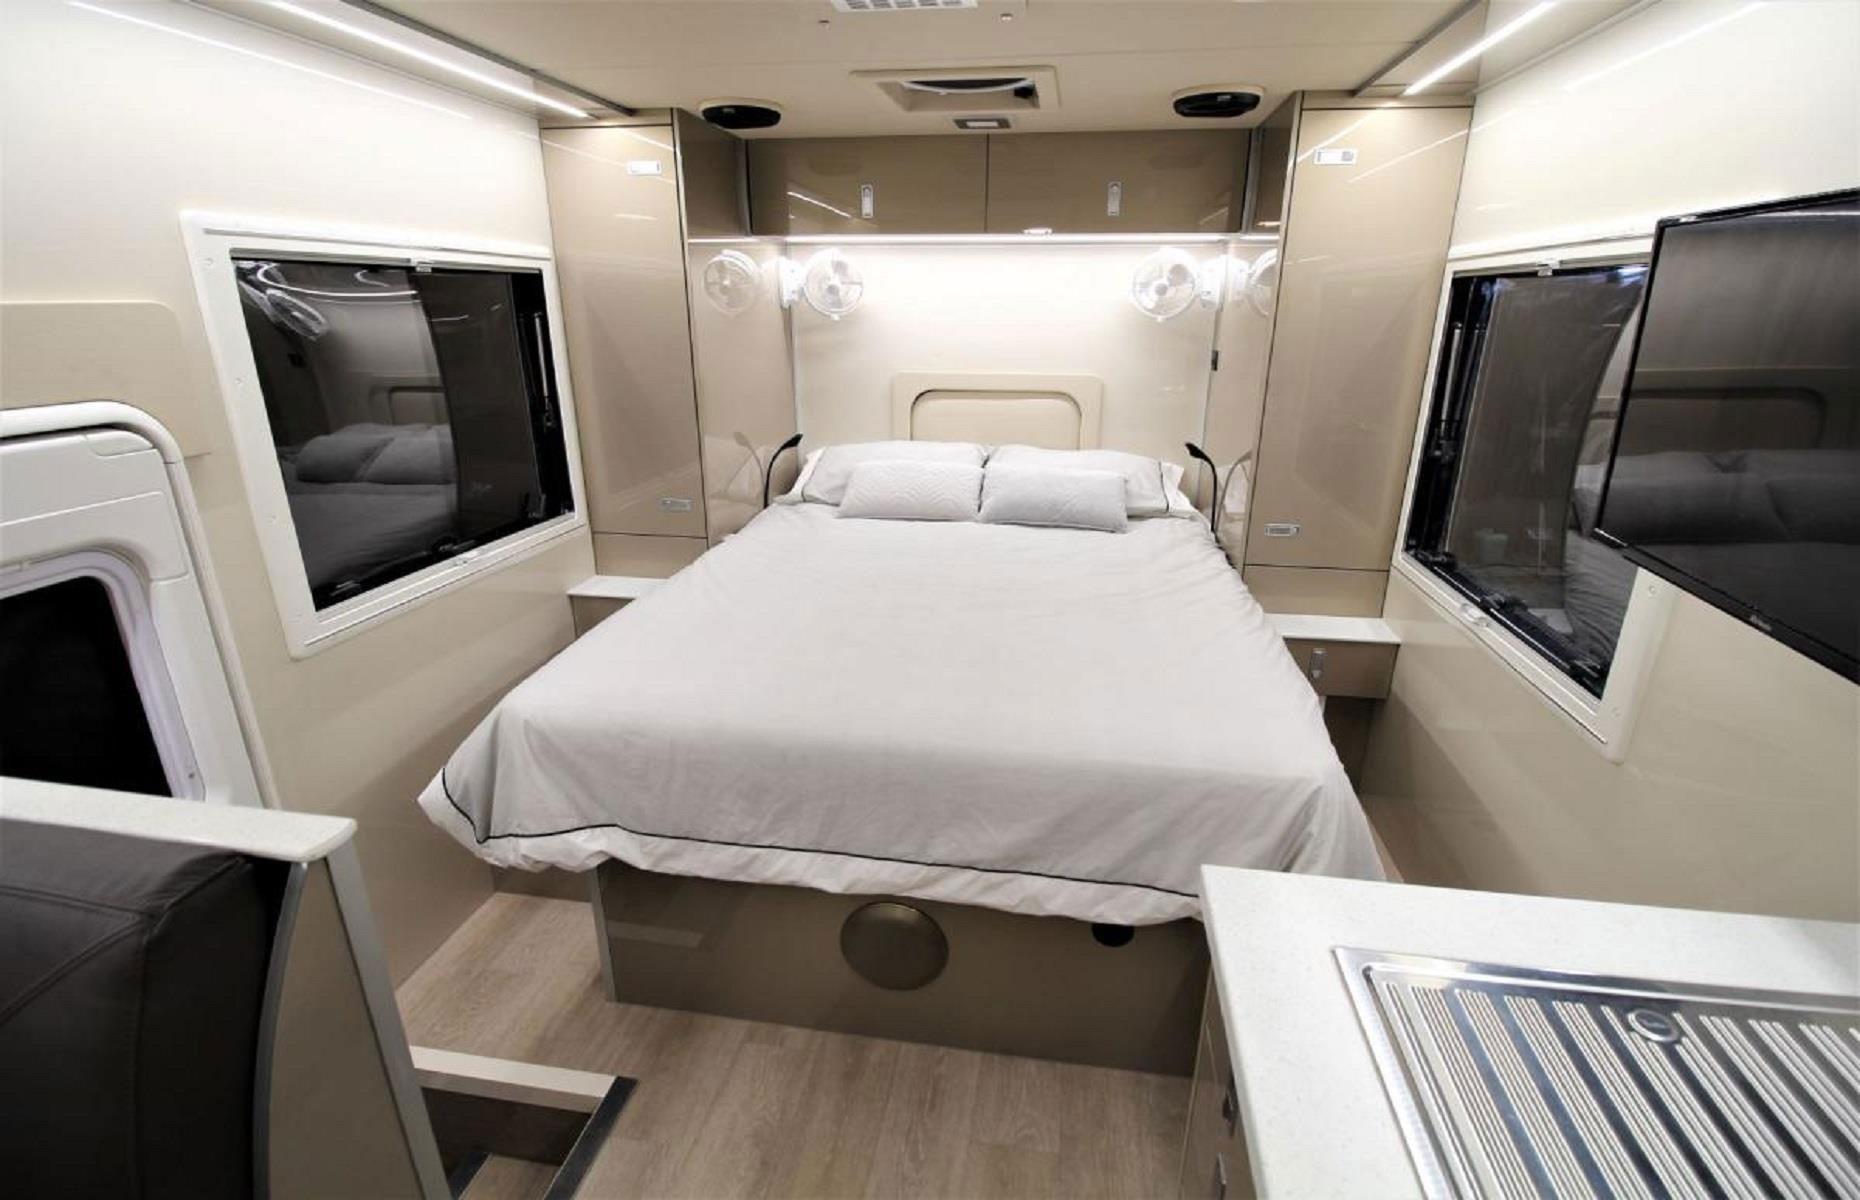 <p>Like pretty much every other extra-large RV, the Commander 8x8 has its very own double bedroom, a five-star touch you just won't find in a smaller motorhome.</p>  <p>The cozy space is decked out with a widescreen TV, built-in storage and large picture windows. There are actually four TVs in the motorhome, which isn't short on amenities.</p>